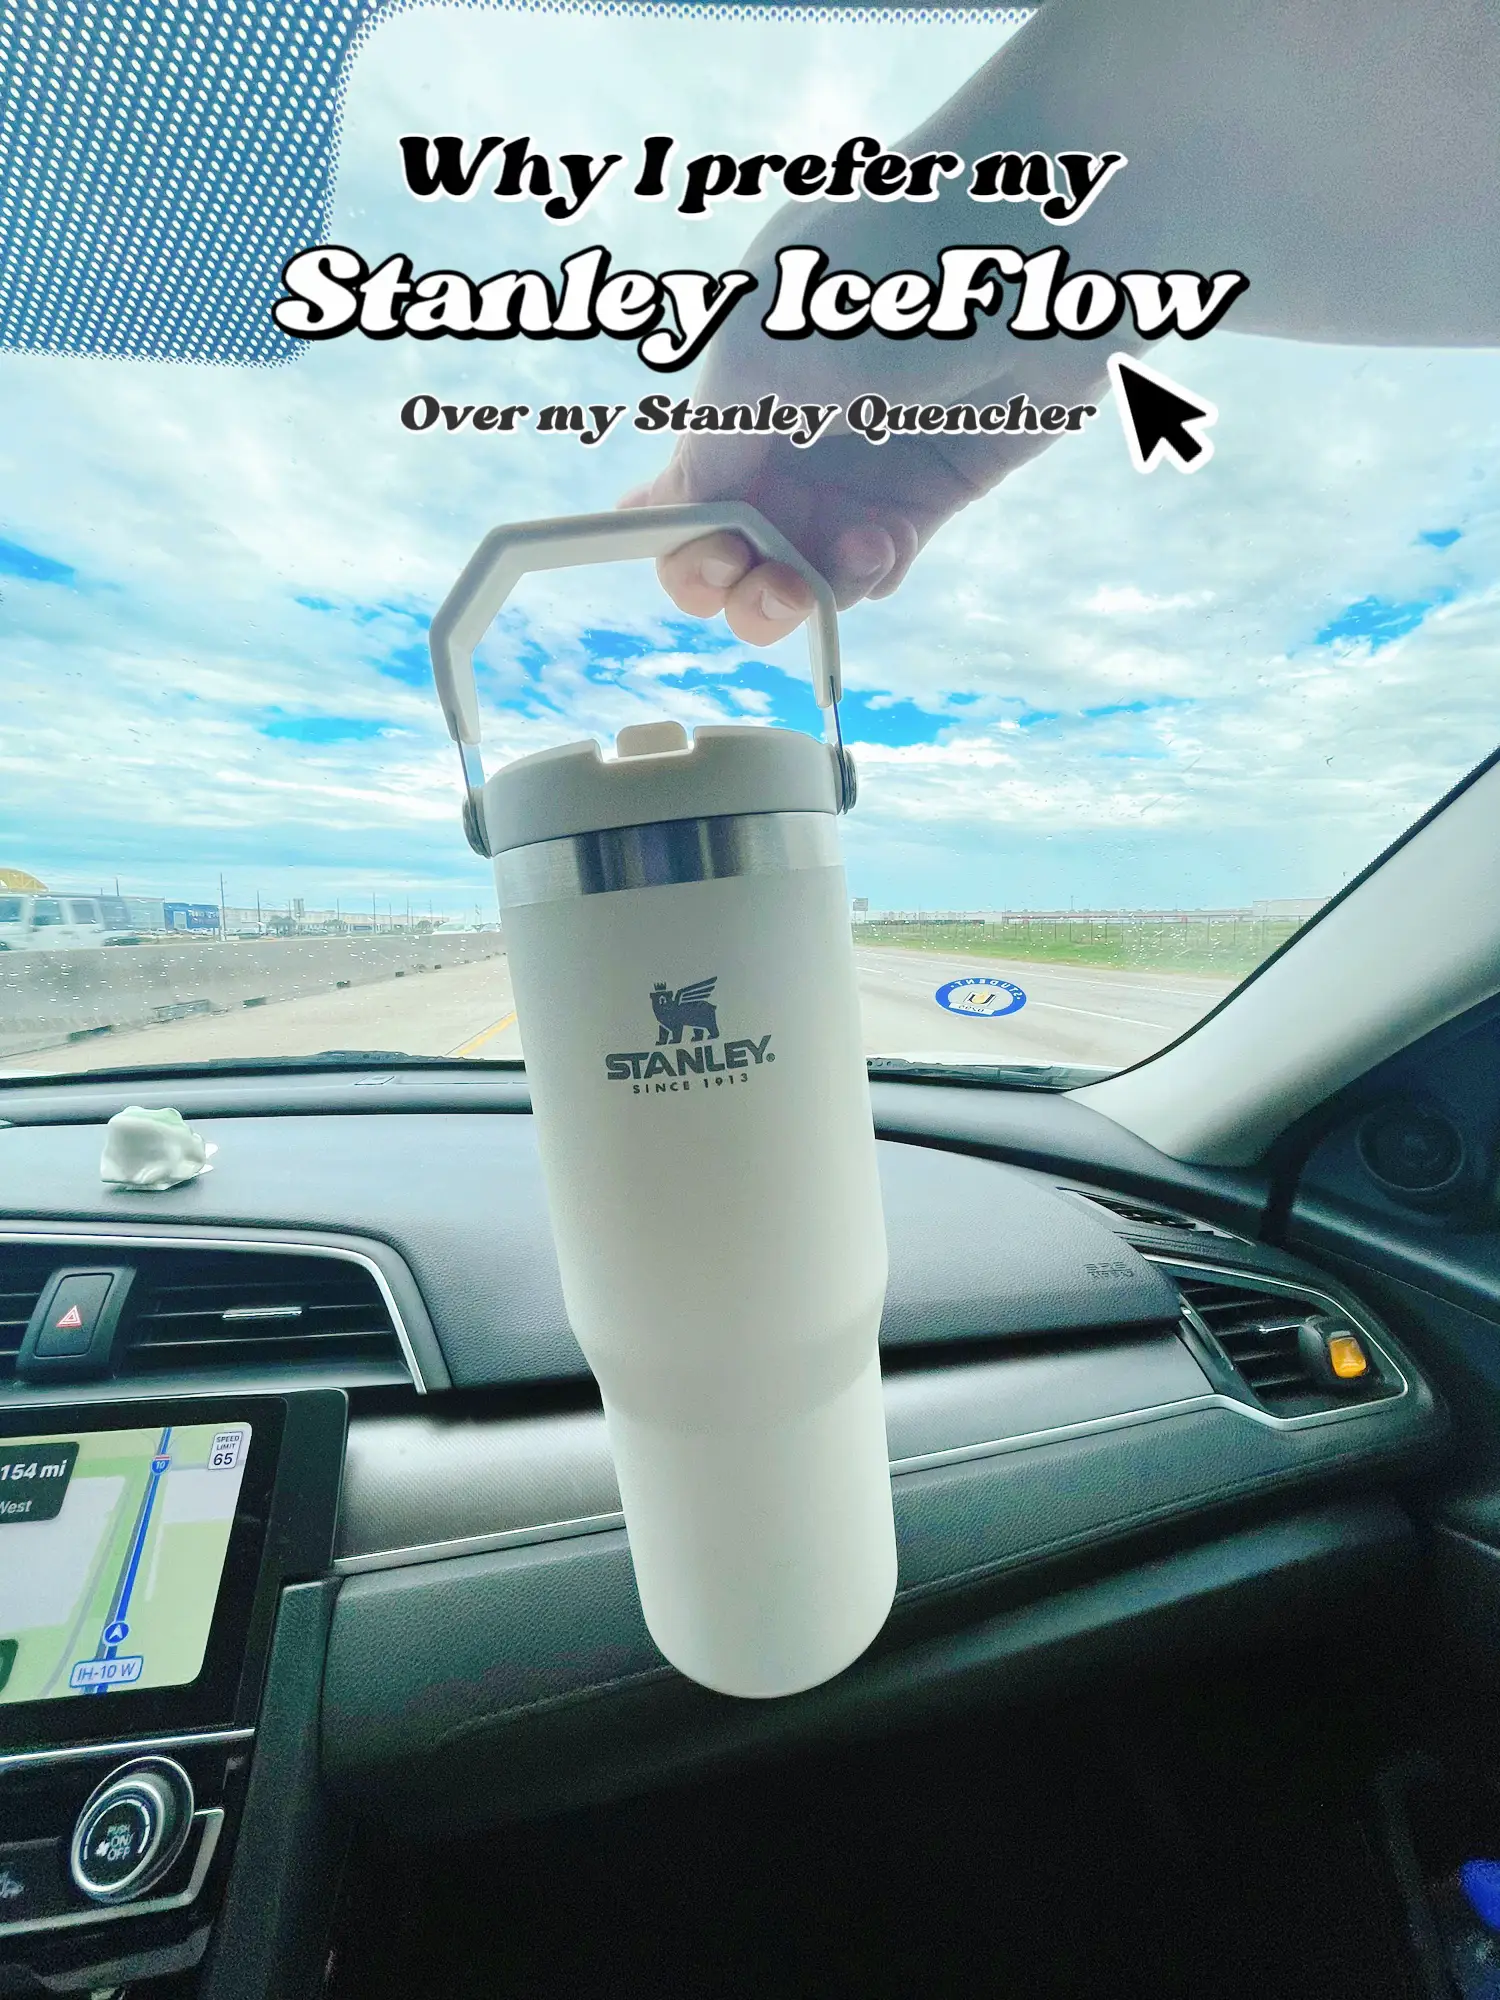 Replying to @christyv2017 easy peasy lemon squeezy! #Stanley #iceflow , Stanley Ice Flow